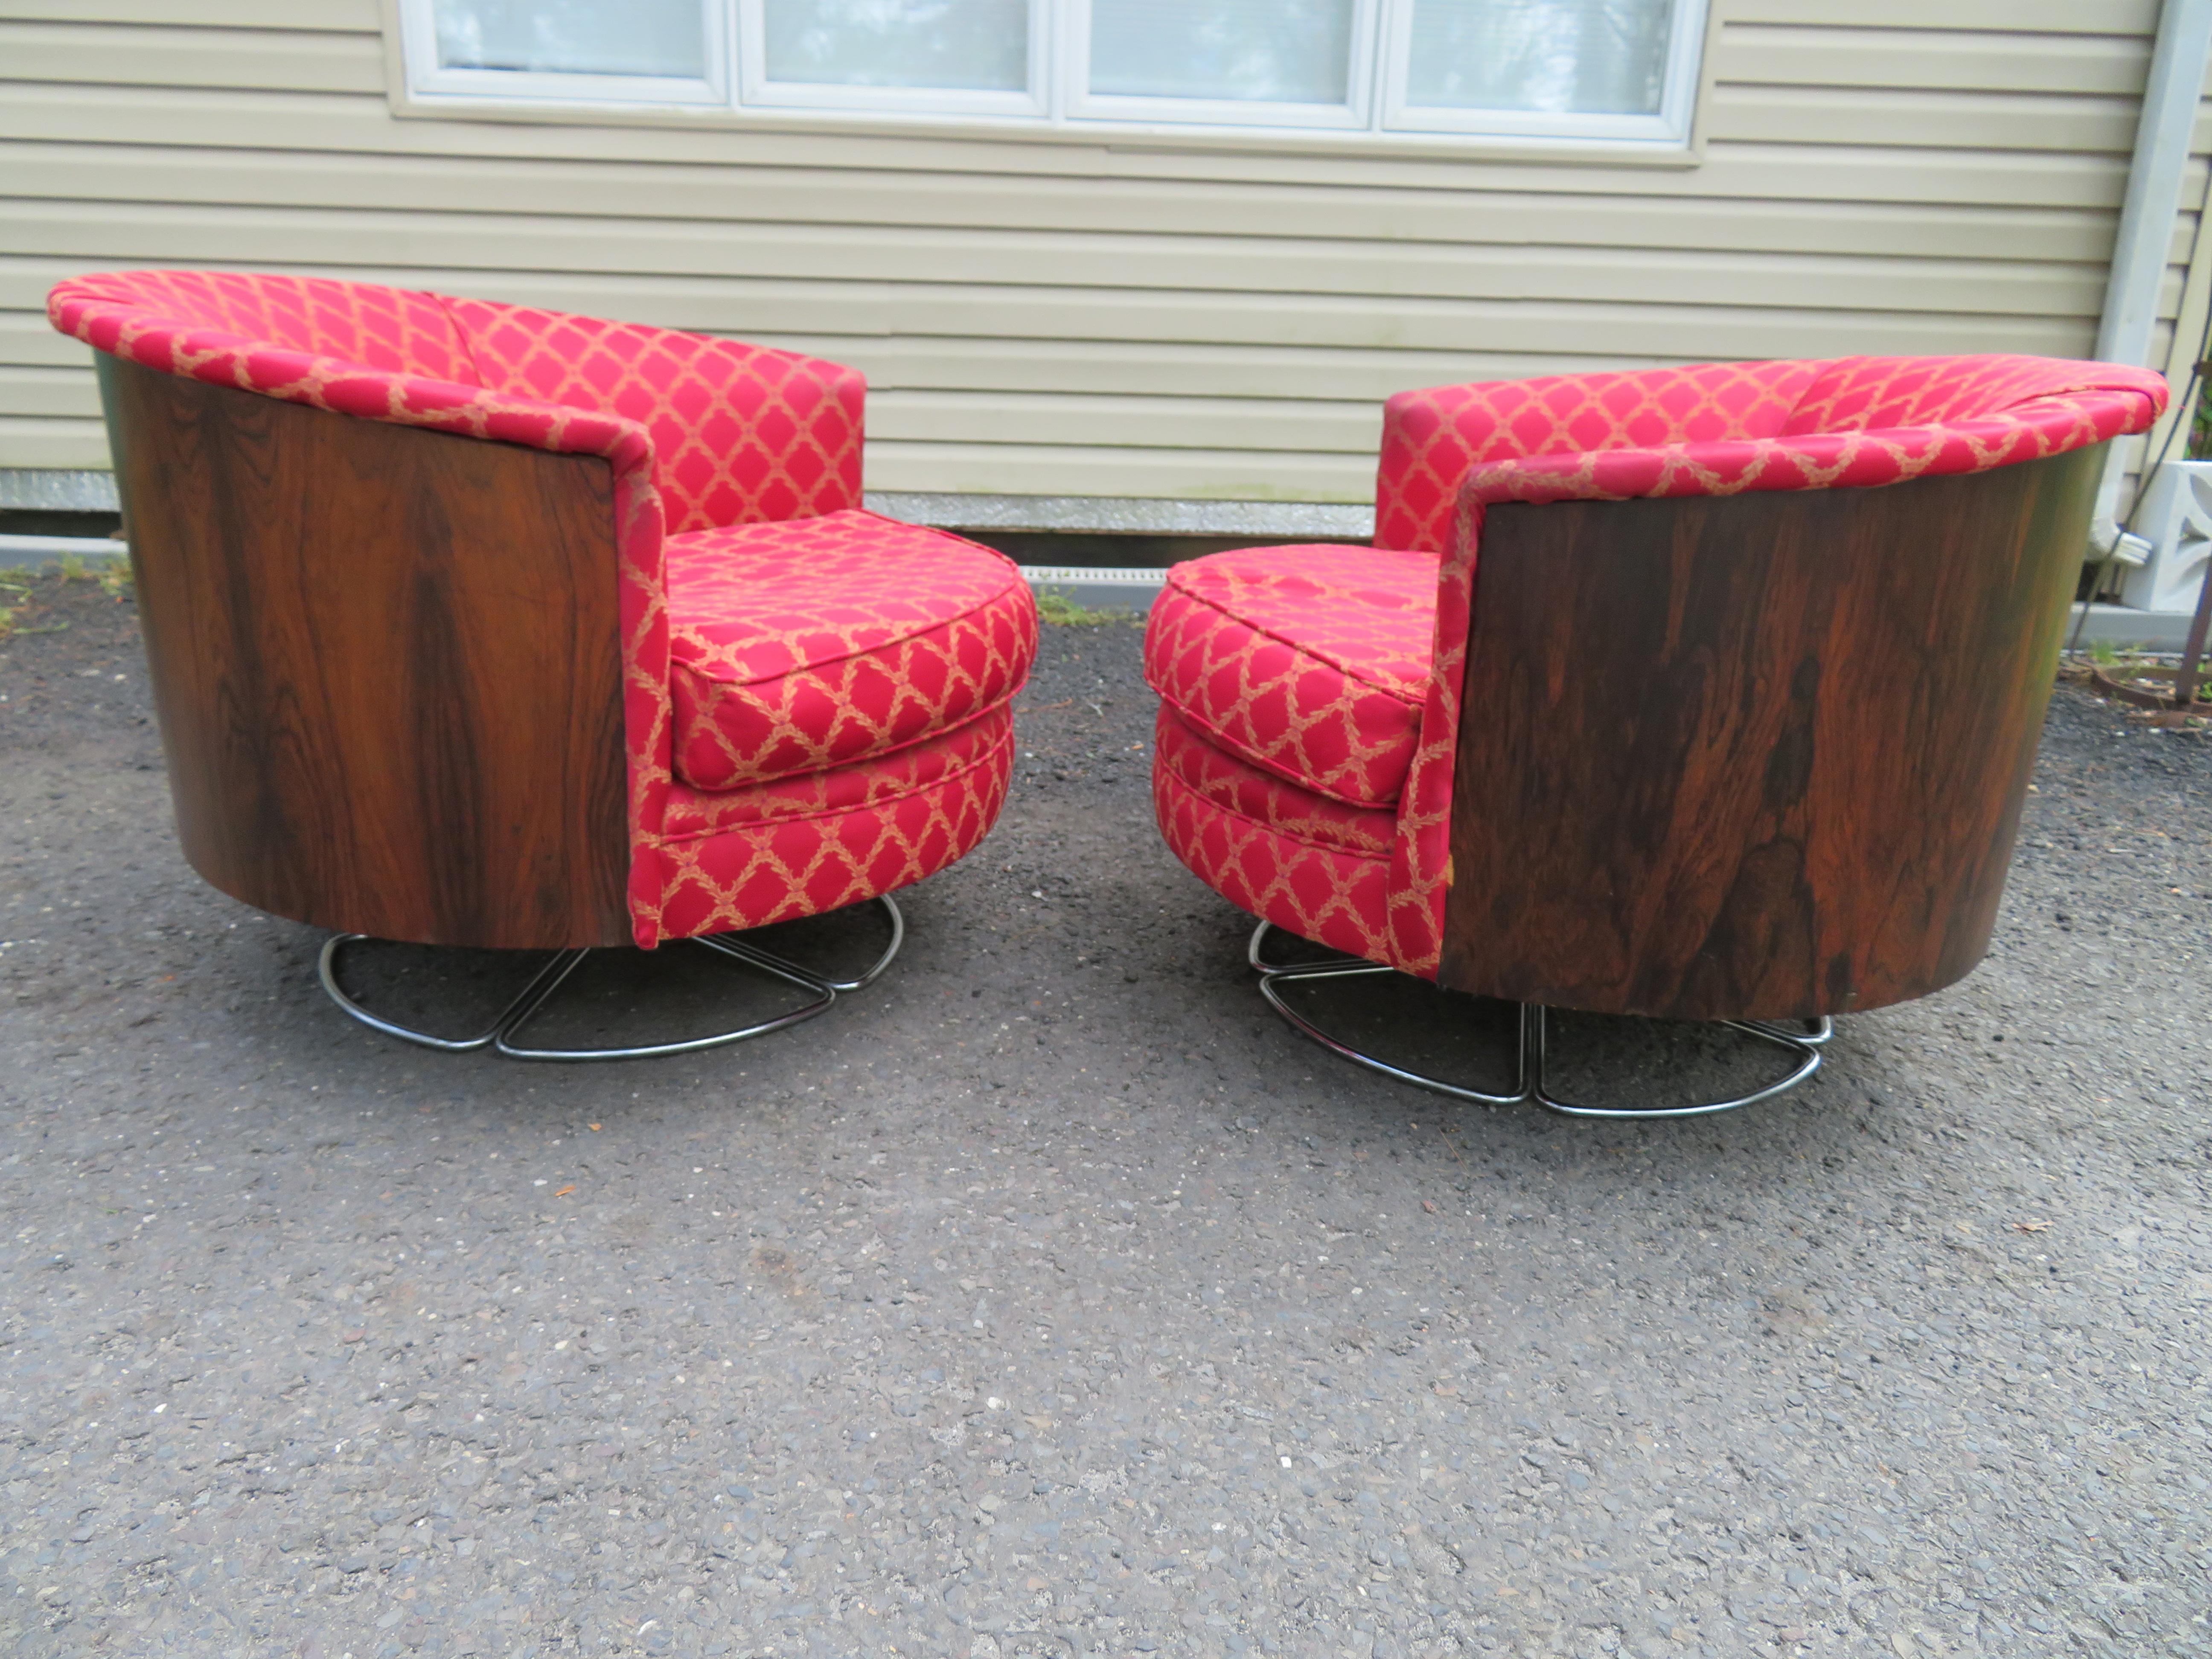 Magnificent pair of Milo Baughman style rosewood swivel chairs by Selig. These fine and rare chairs were reupholstered back in the 80's and still look presentable. The rosewood is dark and rich and in great shape. They measure 25